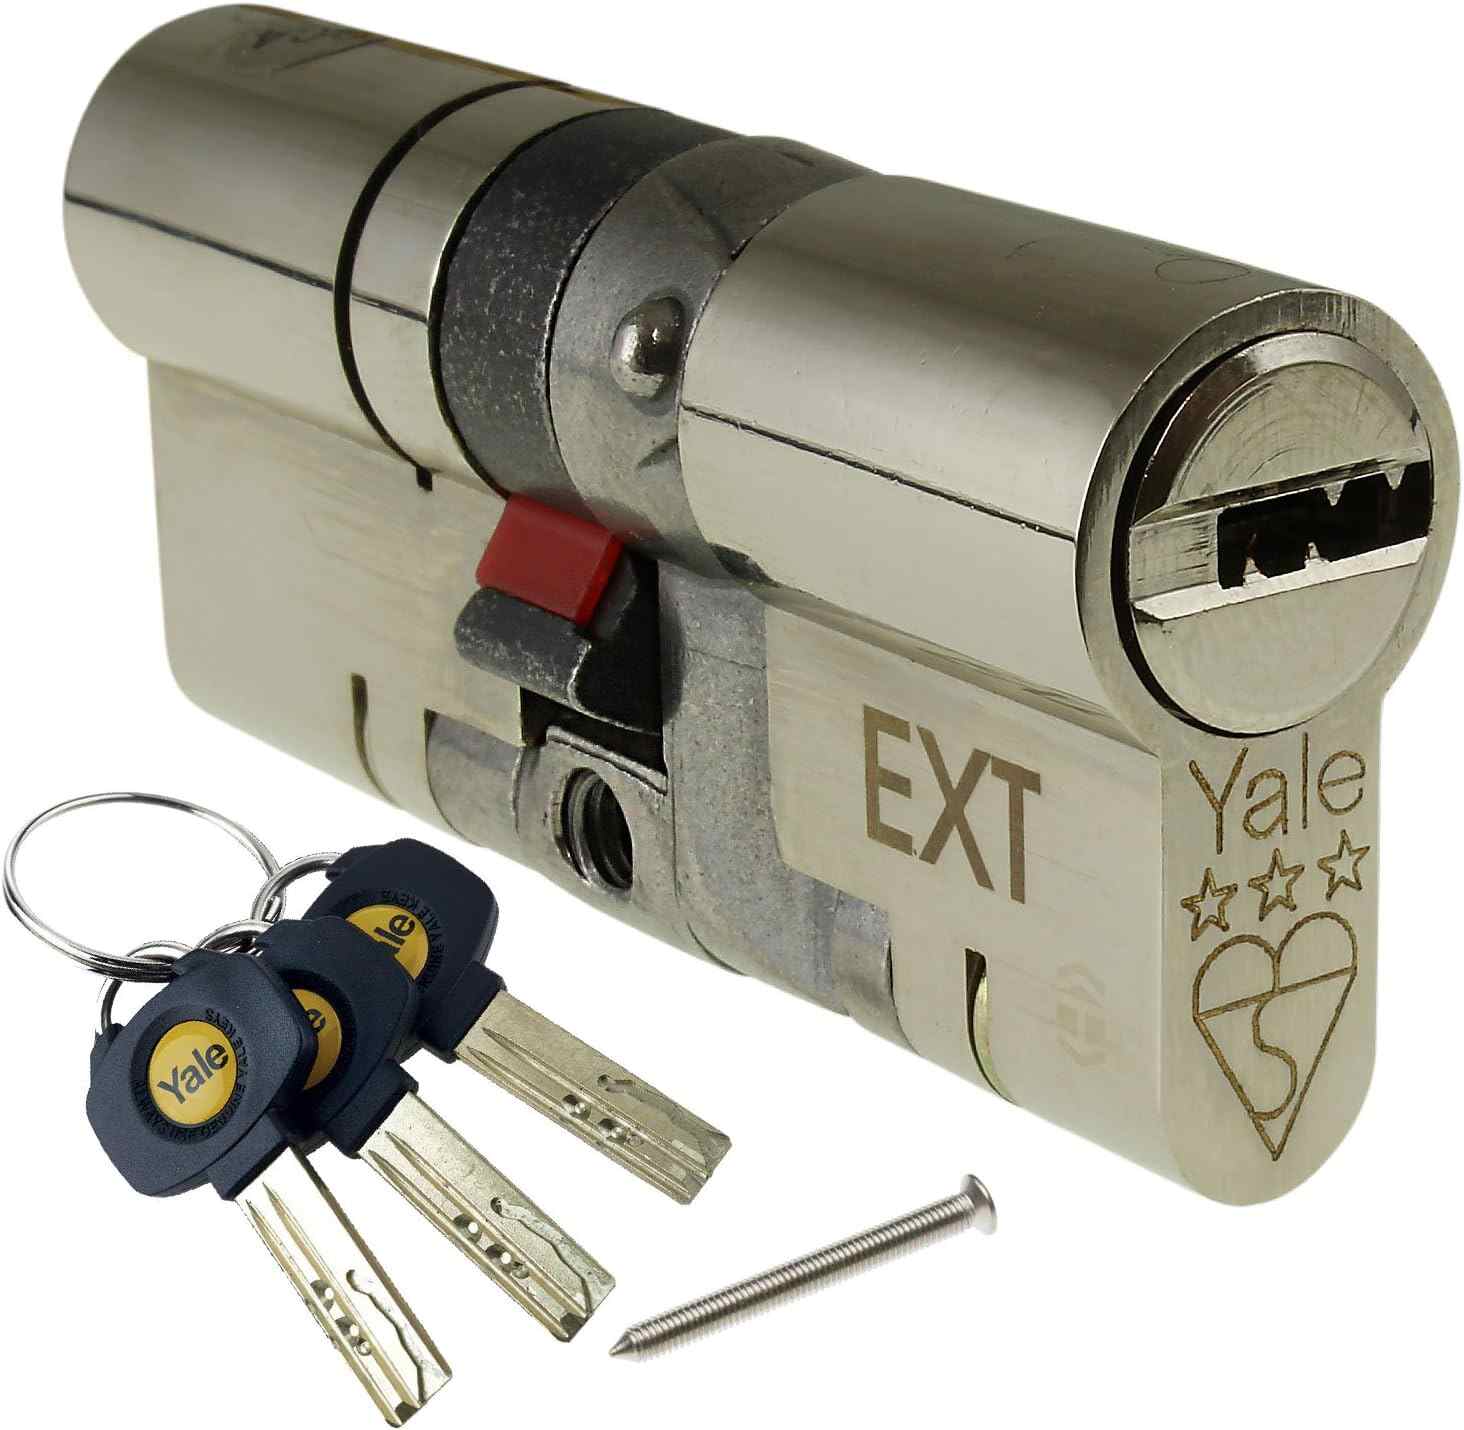 Lock-Snapping and Anti-Snap Lock Solutions